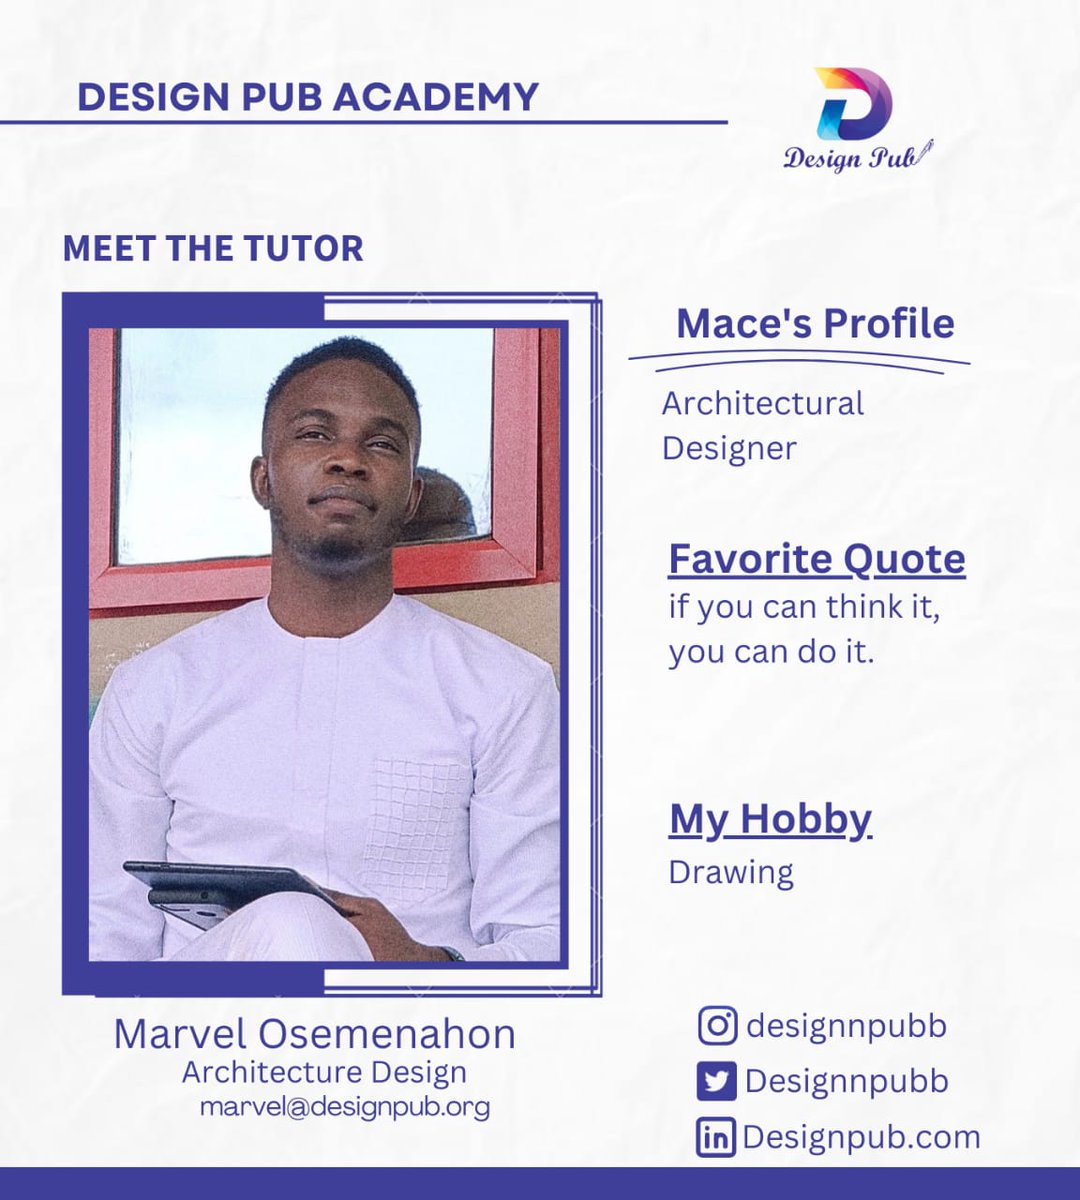 Architectural design made easy for you. Come learn how to become a Pro #architect and start earning with the skill.

#architecturaldesign #autocad  #reddit #structuraldesigns